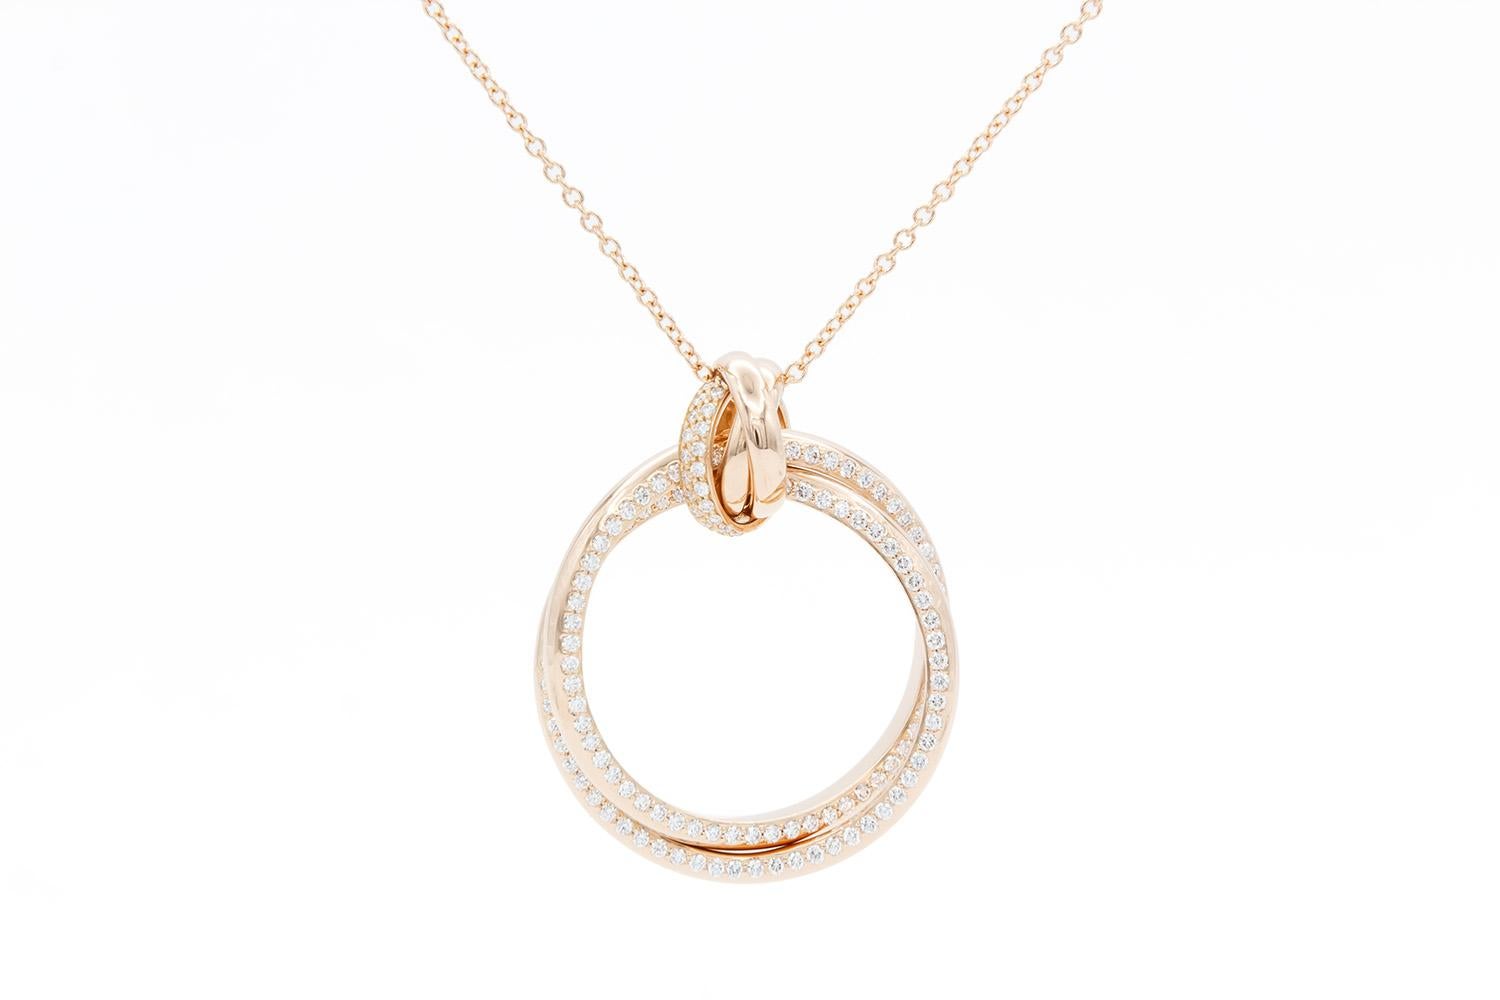 We are pleased to offer this 18k Rose Gold & Diamond Tiffany & Co. Paloma Picasso Melody Circle Pendant. Paloma Picasso is one of the most celebrated designers at Tiffany & Co., her creative use of materials and designs stands the test of time. This